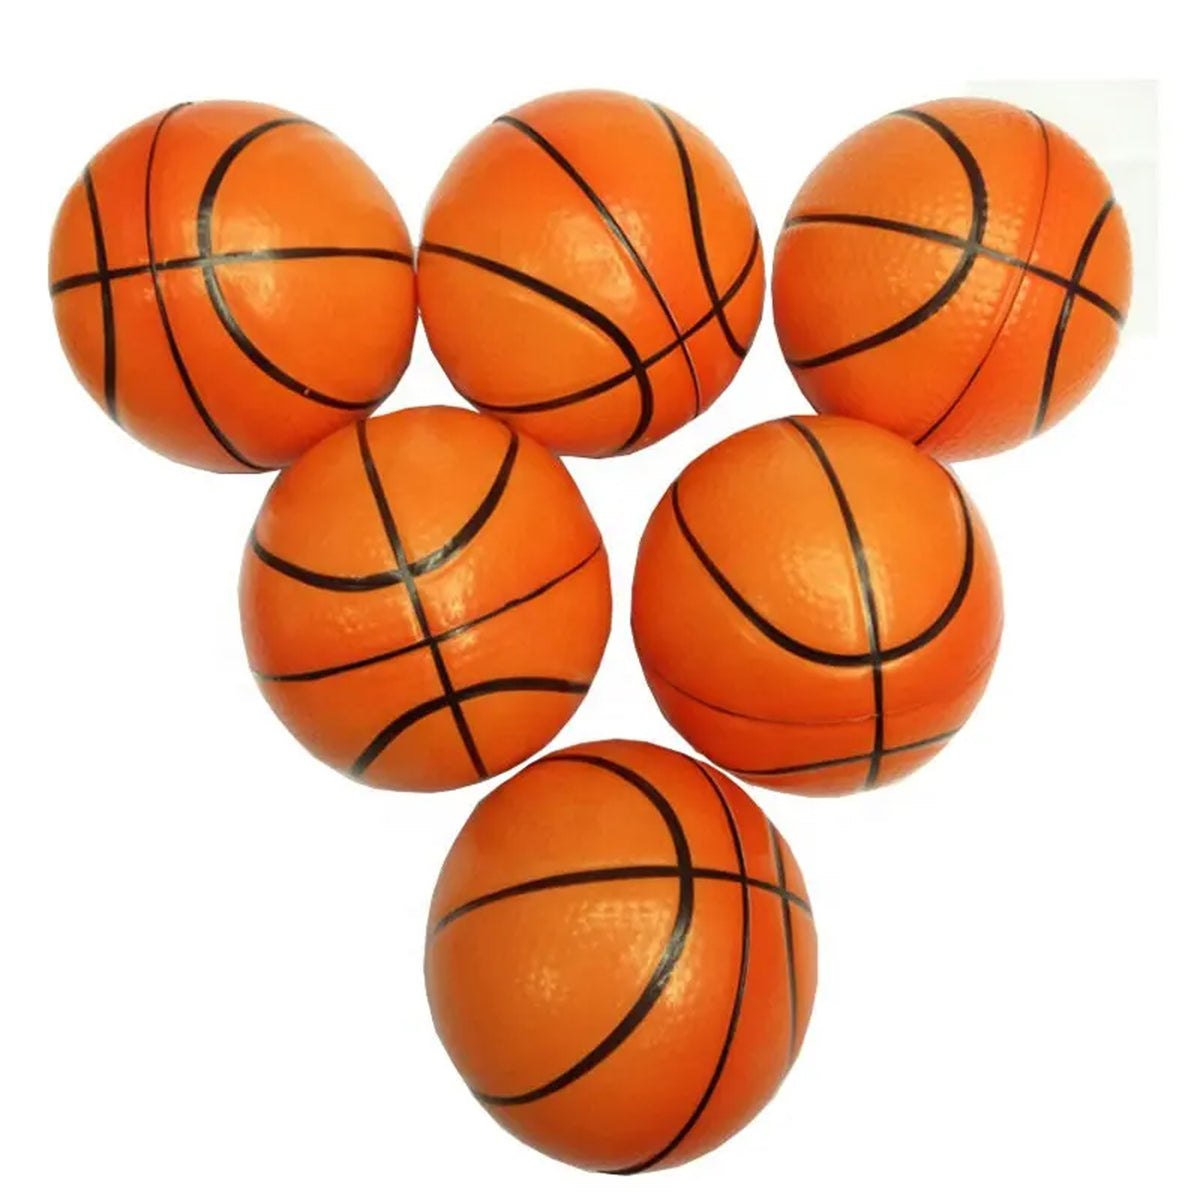 Wholesale Basketball Hi Bouncing Ball Stress Relief Toy